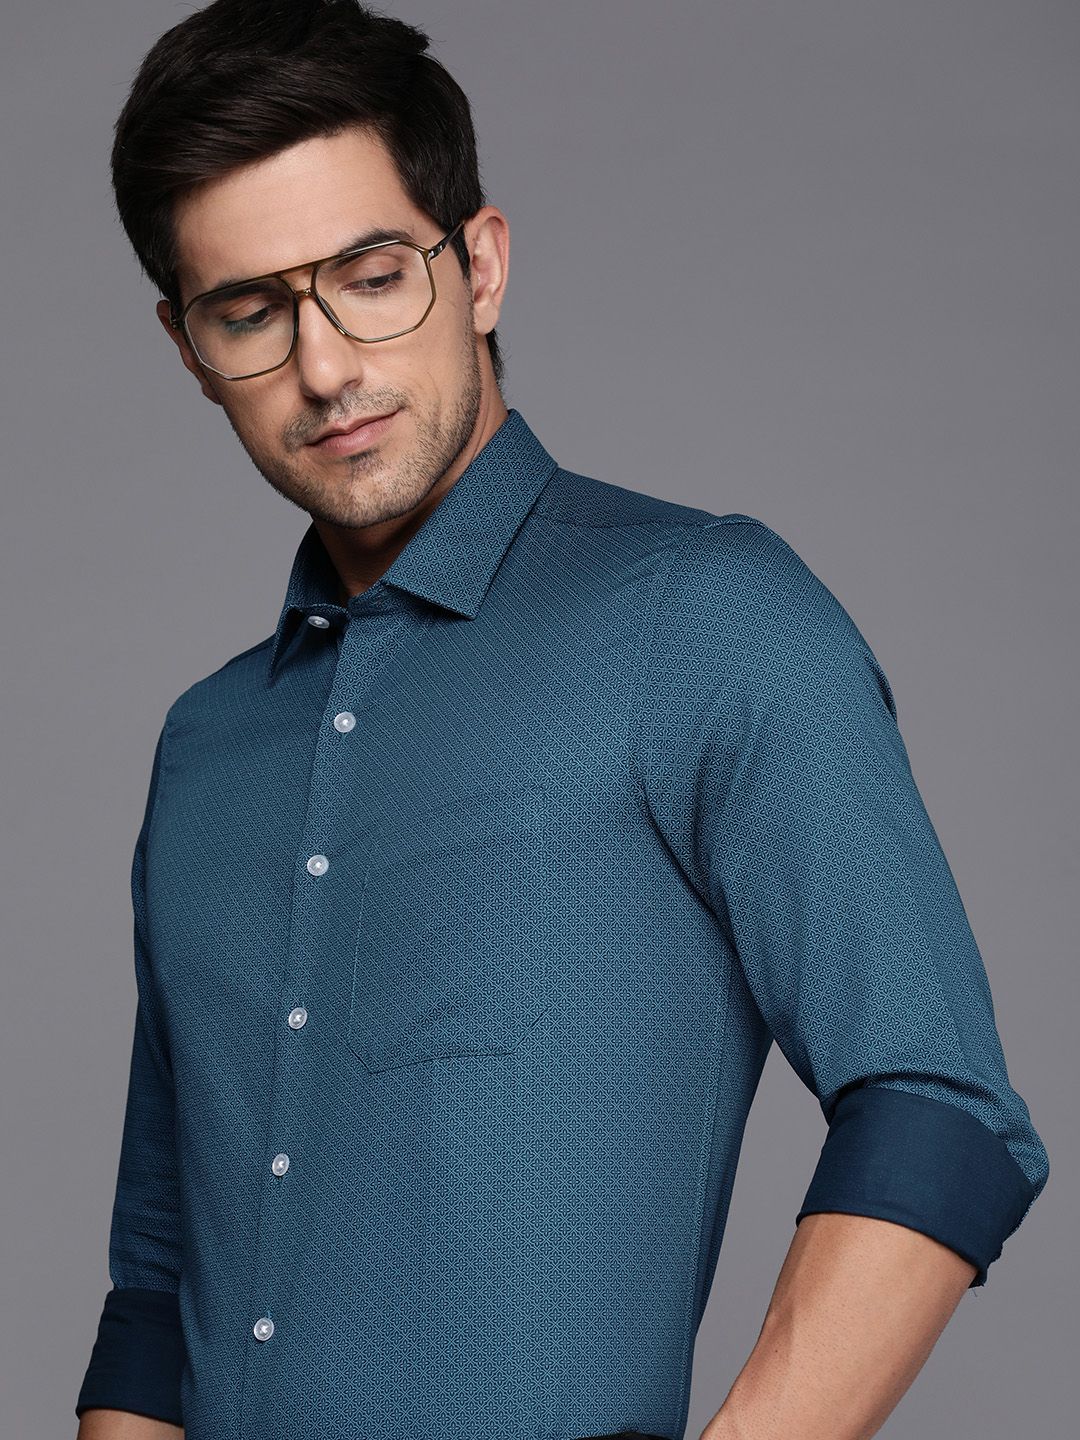 Buy Louis Philippe Louis Philippe Men Formal Shirt at Redfynd